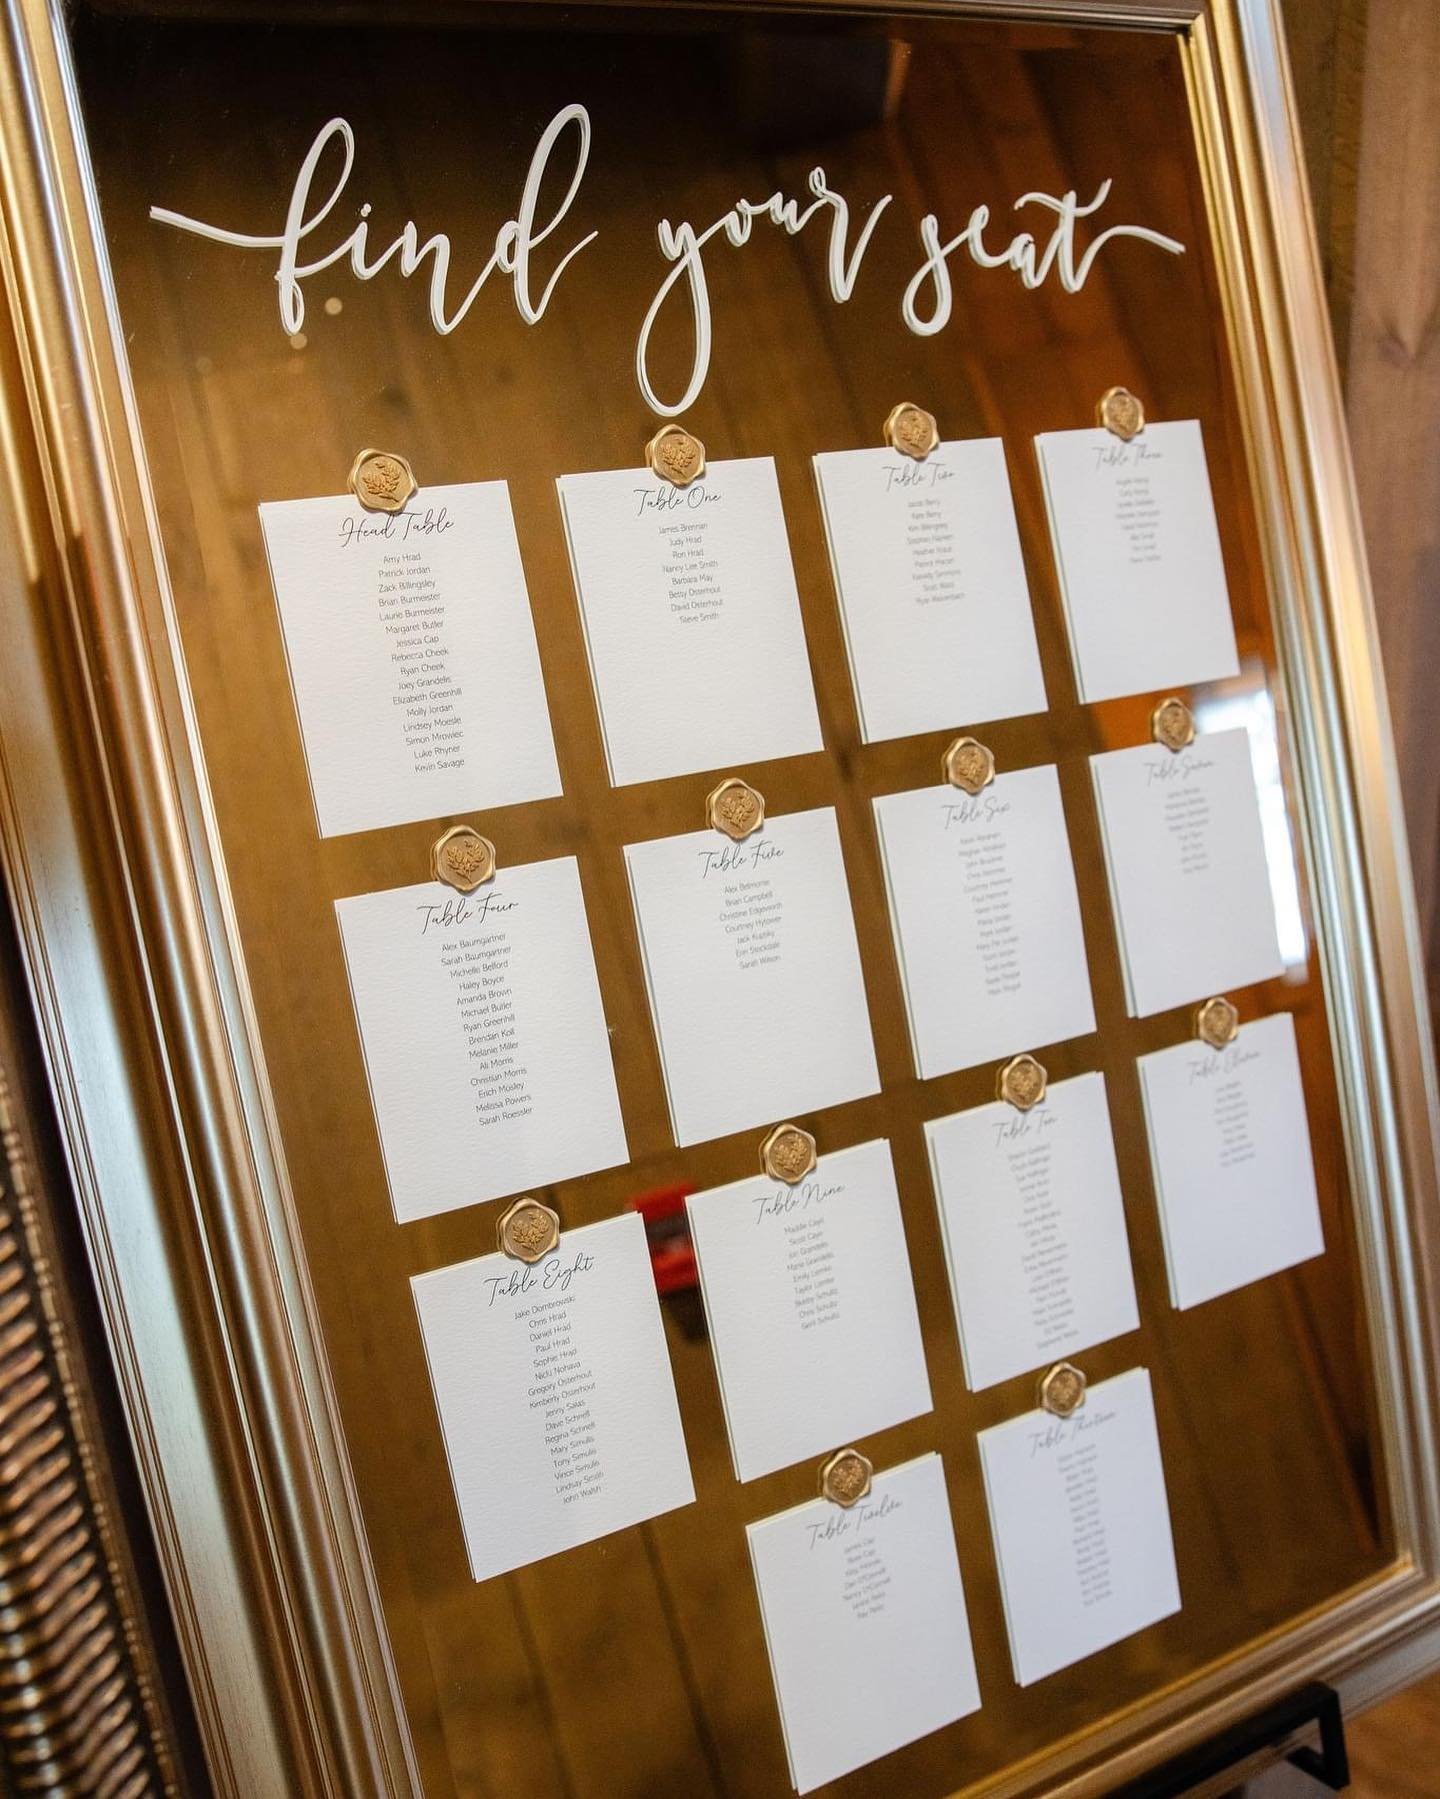 Struggling to decide on how to display your seating chart?

✨ Decide on how you&rsquo;d like to organize your guests - by table or alphabetically
✨ Make sure your seating chart is easy to read
✨ Display your seating chart in an open area where guests